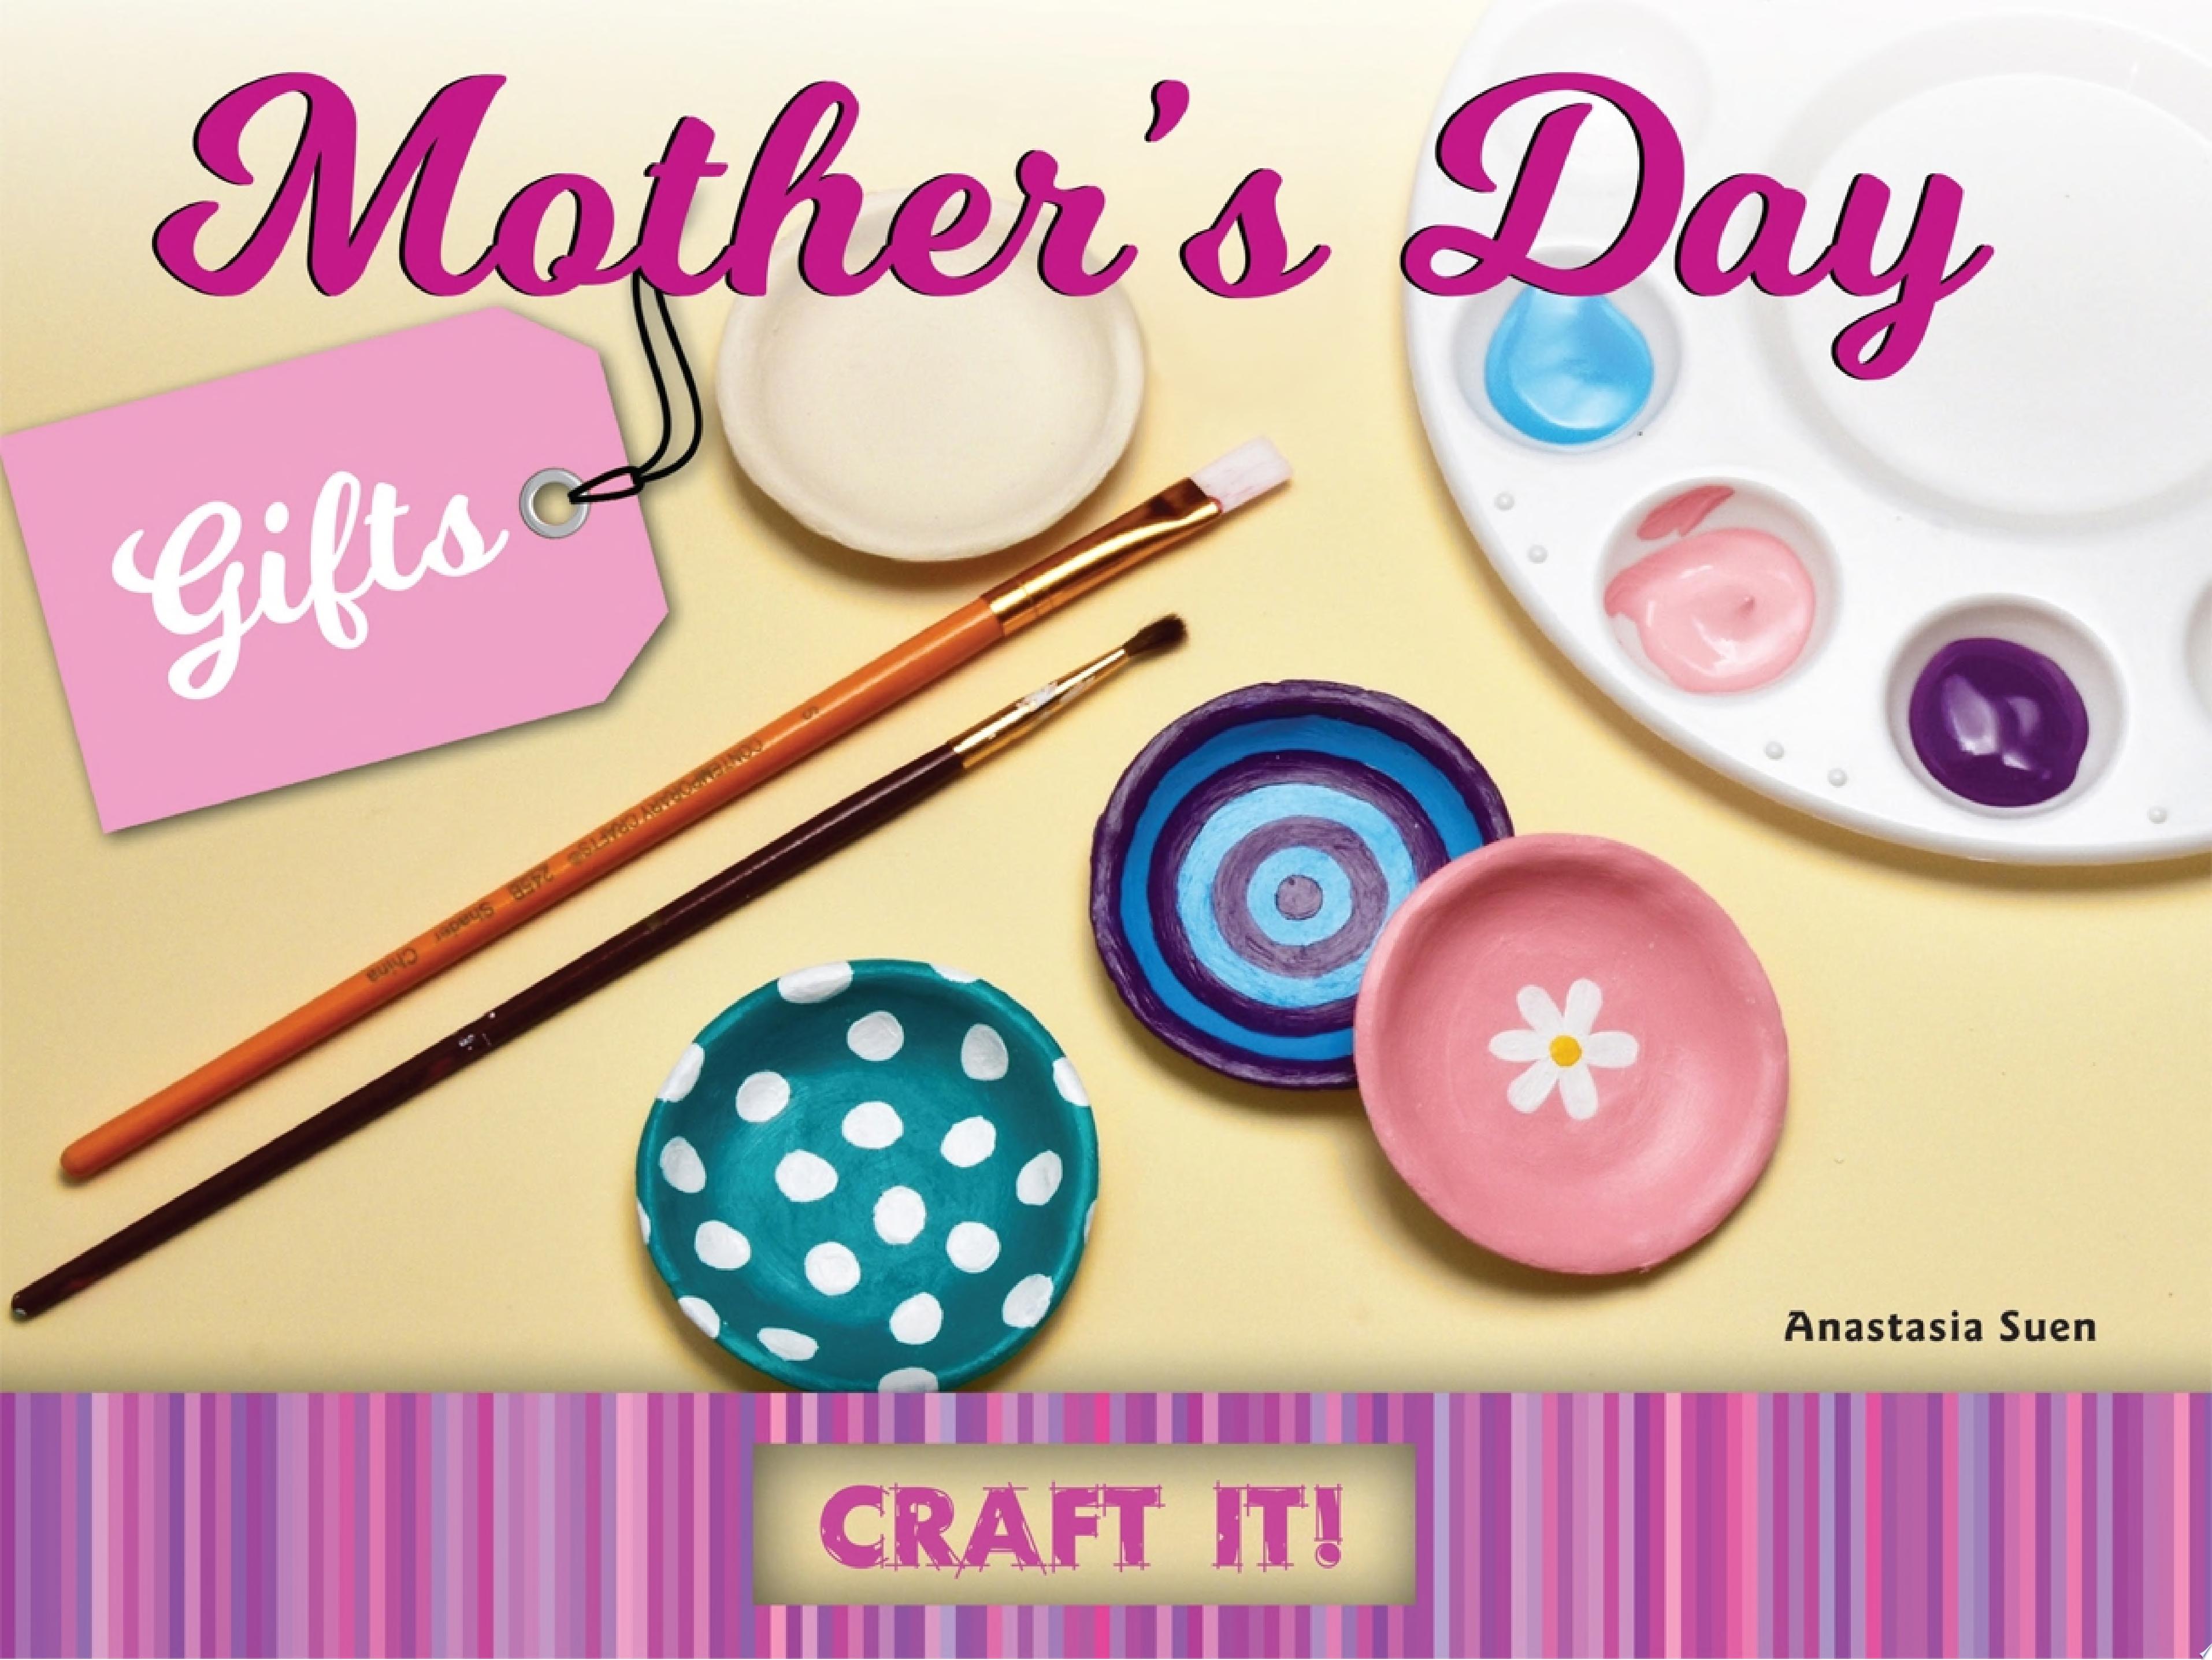 Image for "Mother&#039;s Day Gifts"